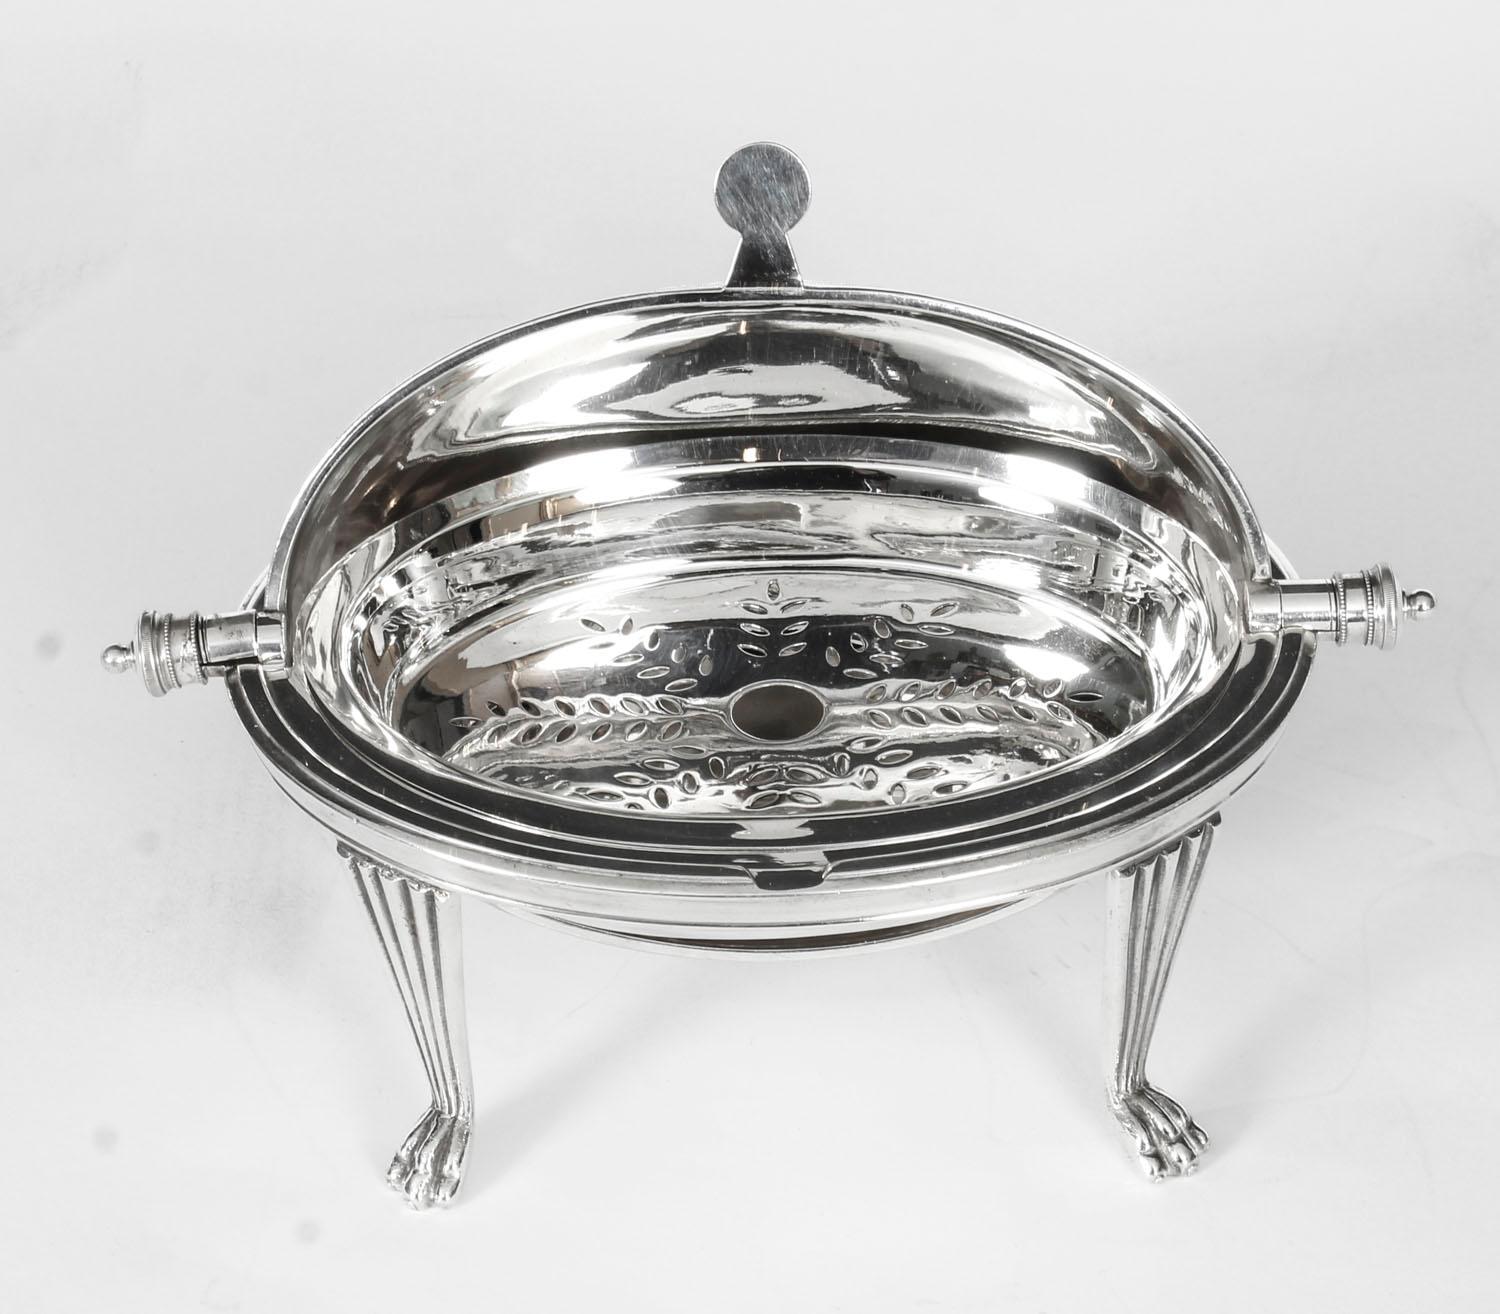 English Antique Silver Plated Roll Over Butter Dish Mappin and Webb, 19th Century